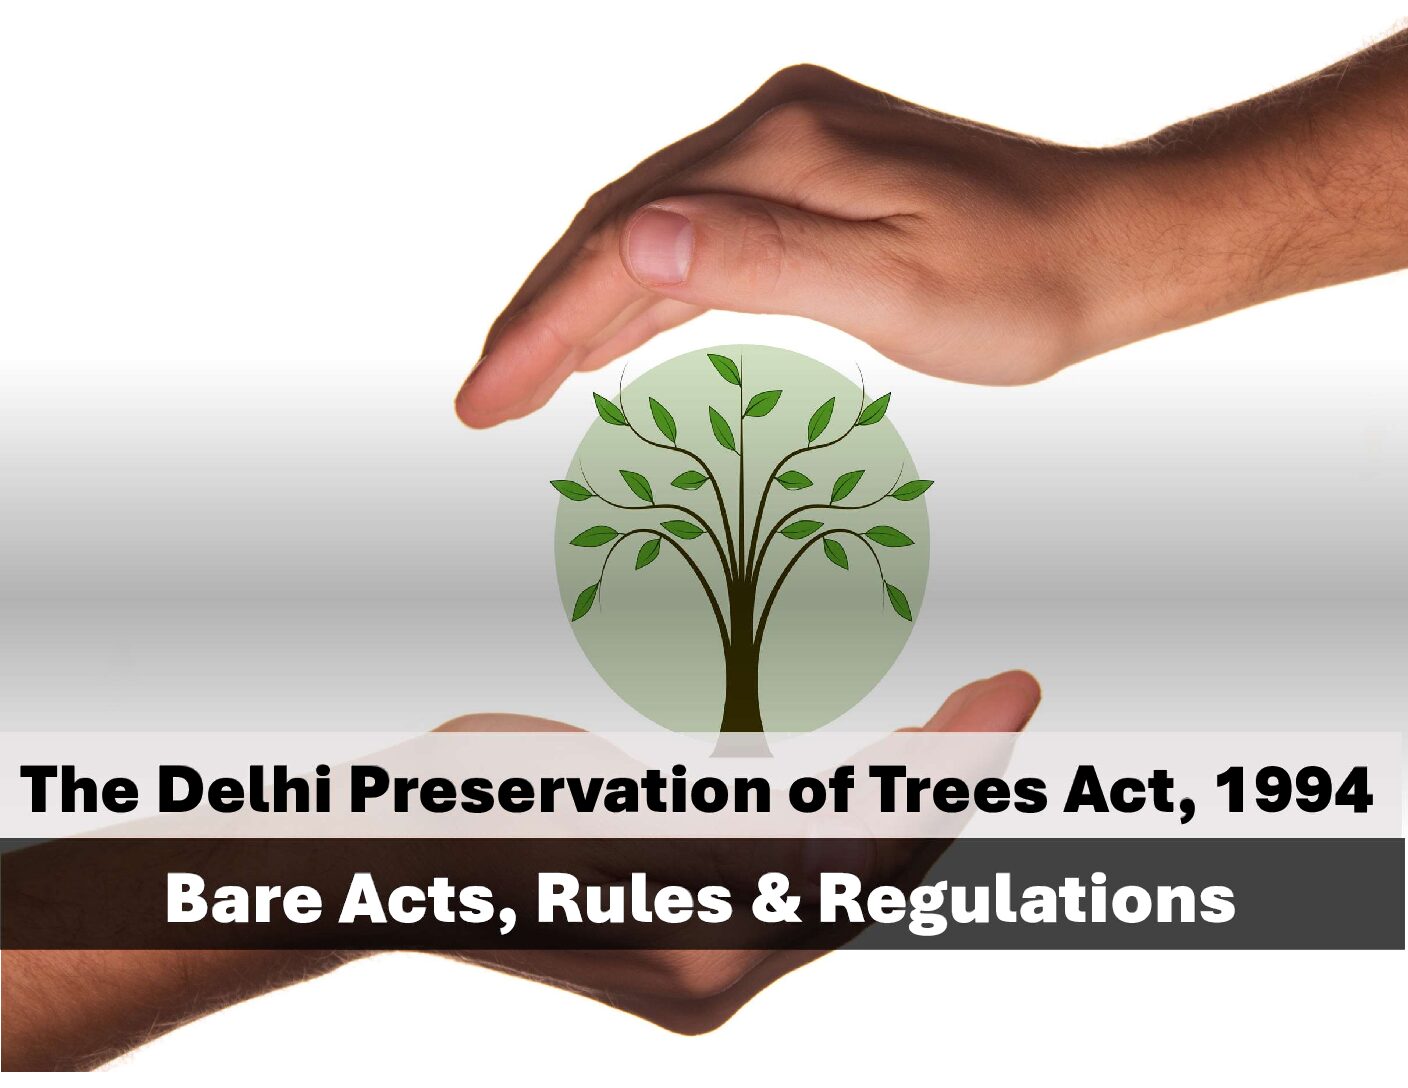 The Delhi Preservation of Trees Act, 1994